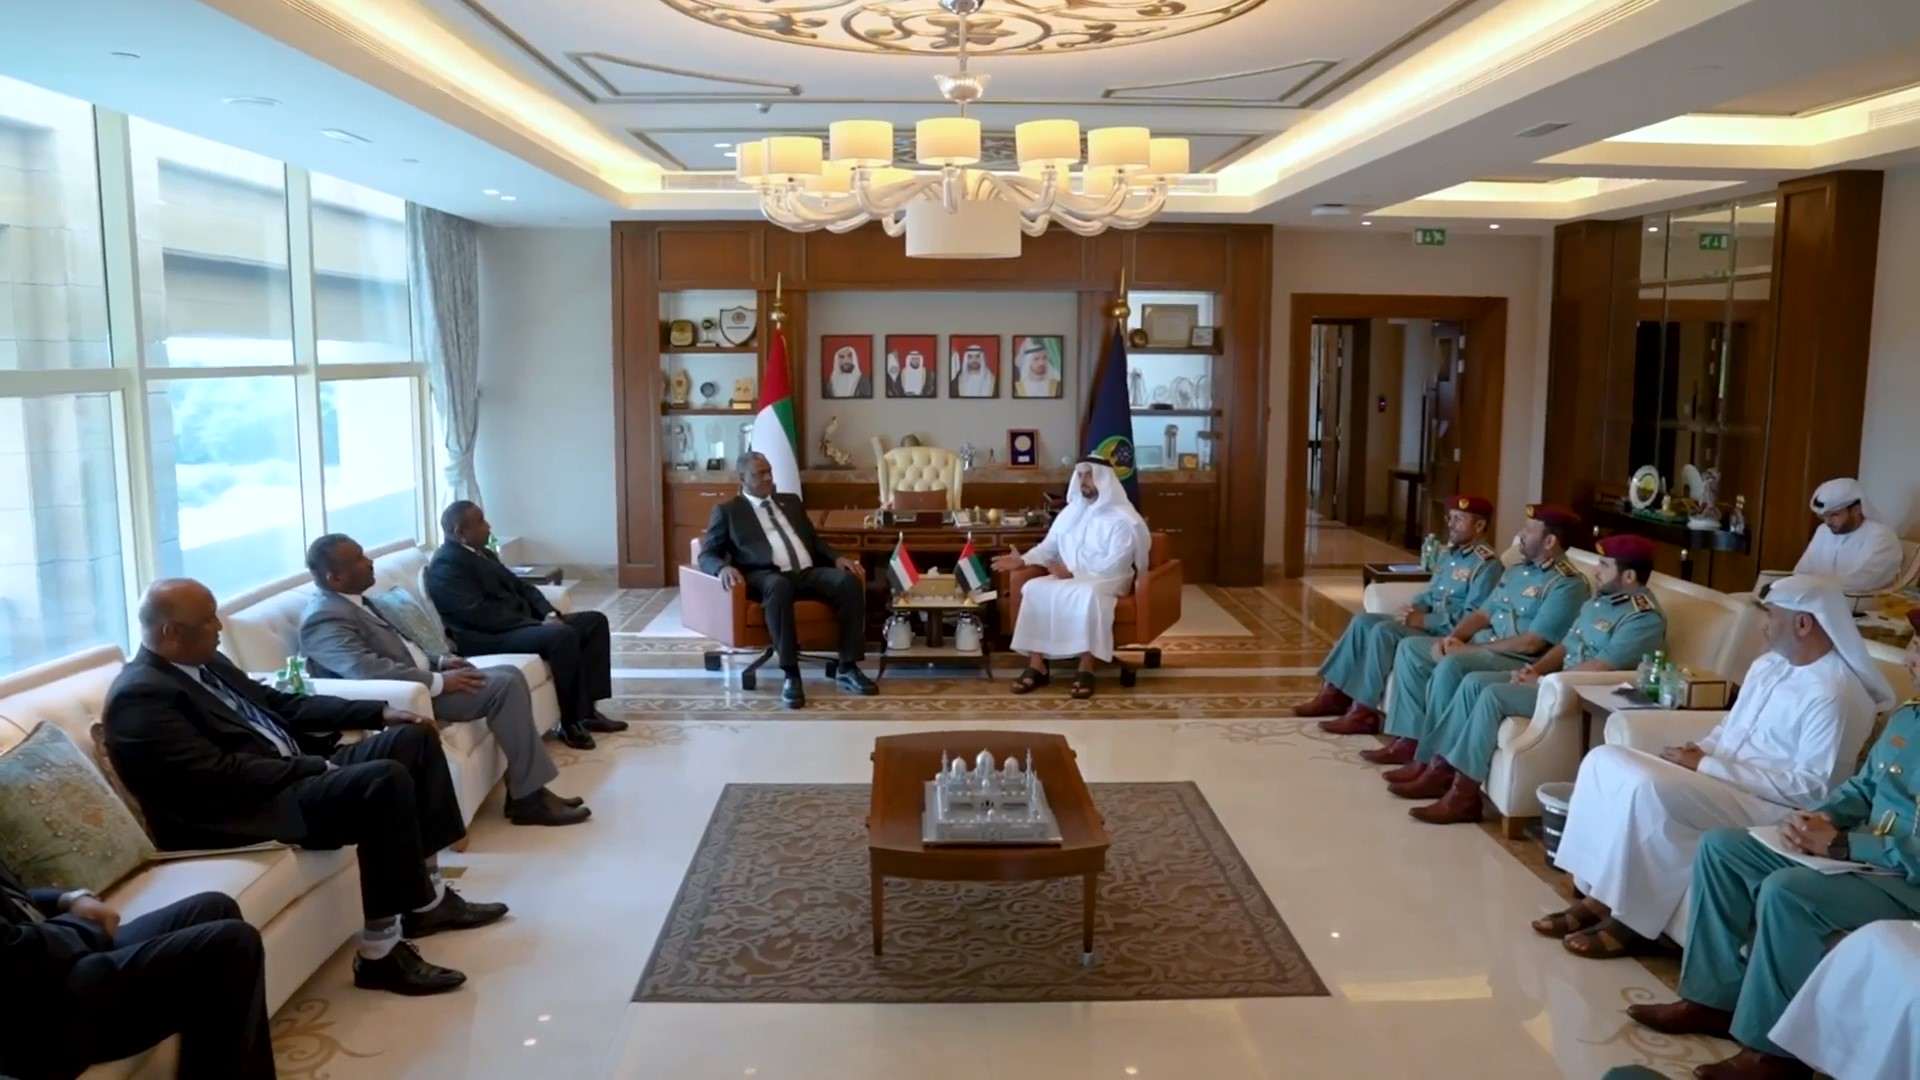 Saif bin Zayed meets Sudanese Minister of Interior